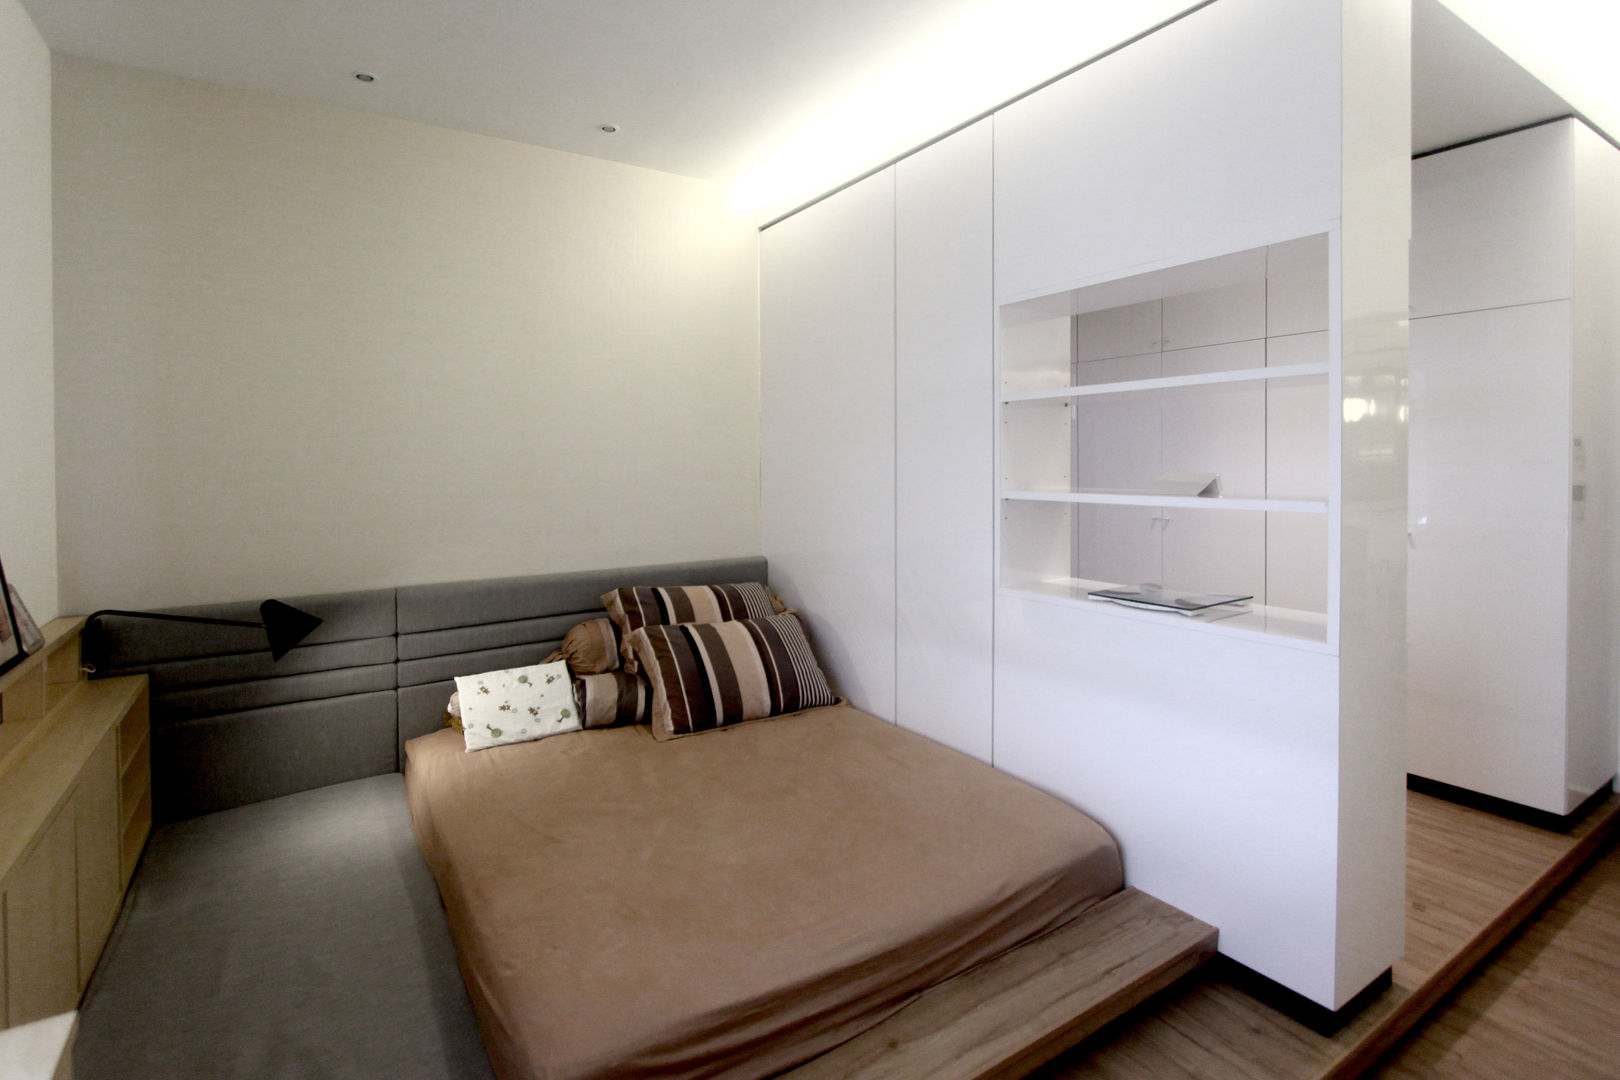 The Sanderson Home, inDfinity Design (M) SDN BHD inDfinity Design (M) SDN BHD Chambre moderne